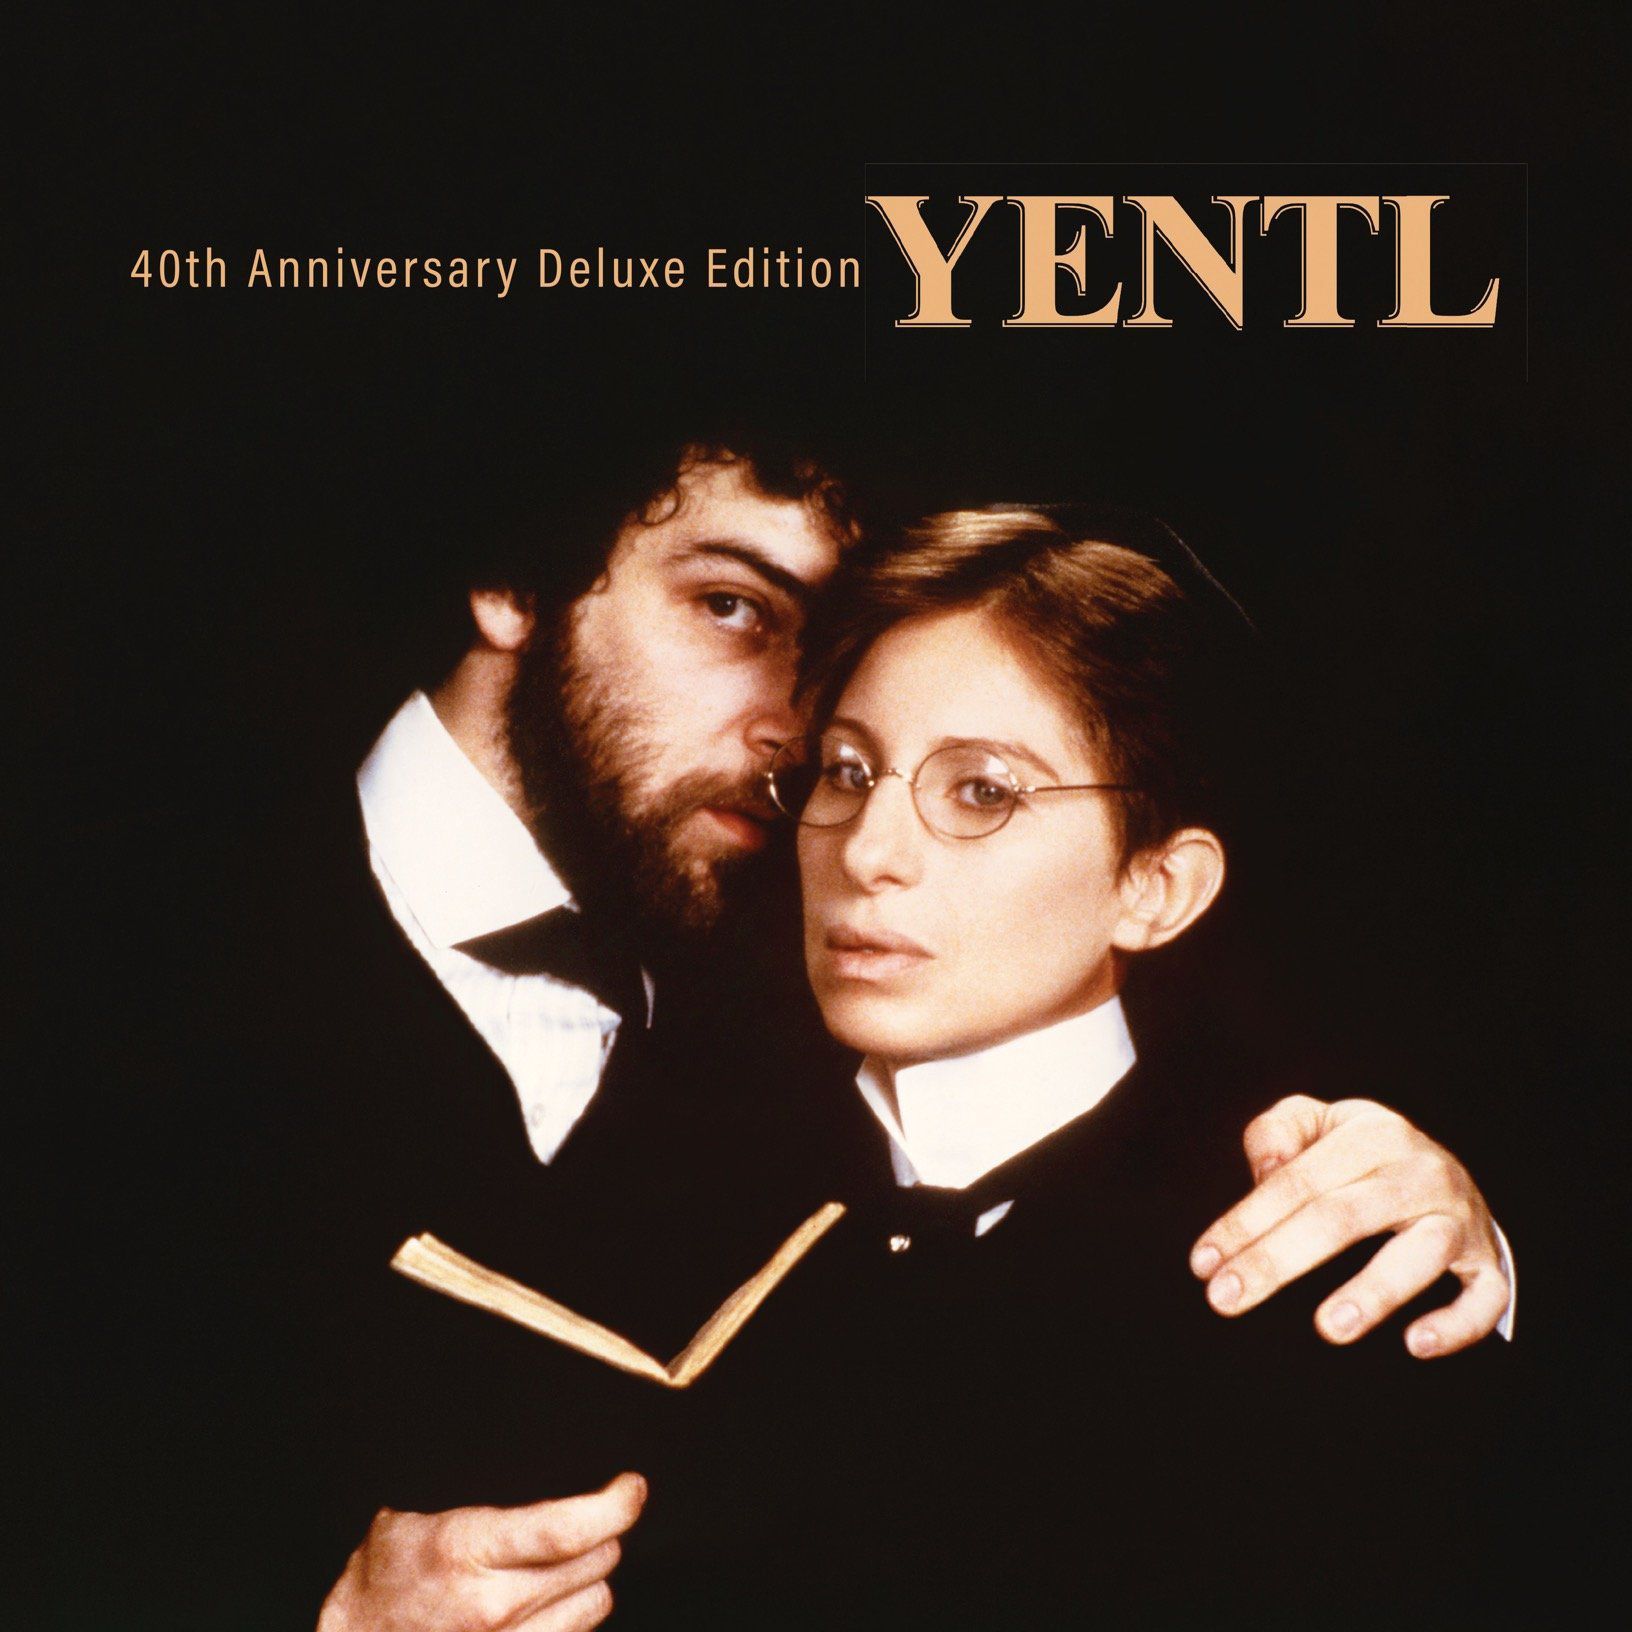 Yentl 40th Anniversary Deluxe Edition CD Cover